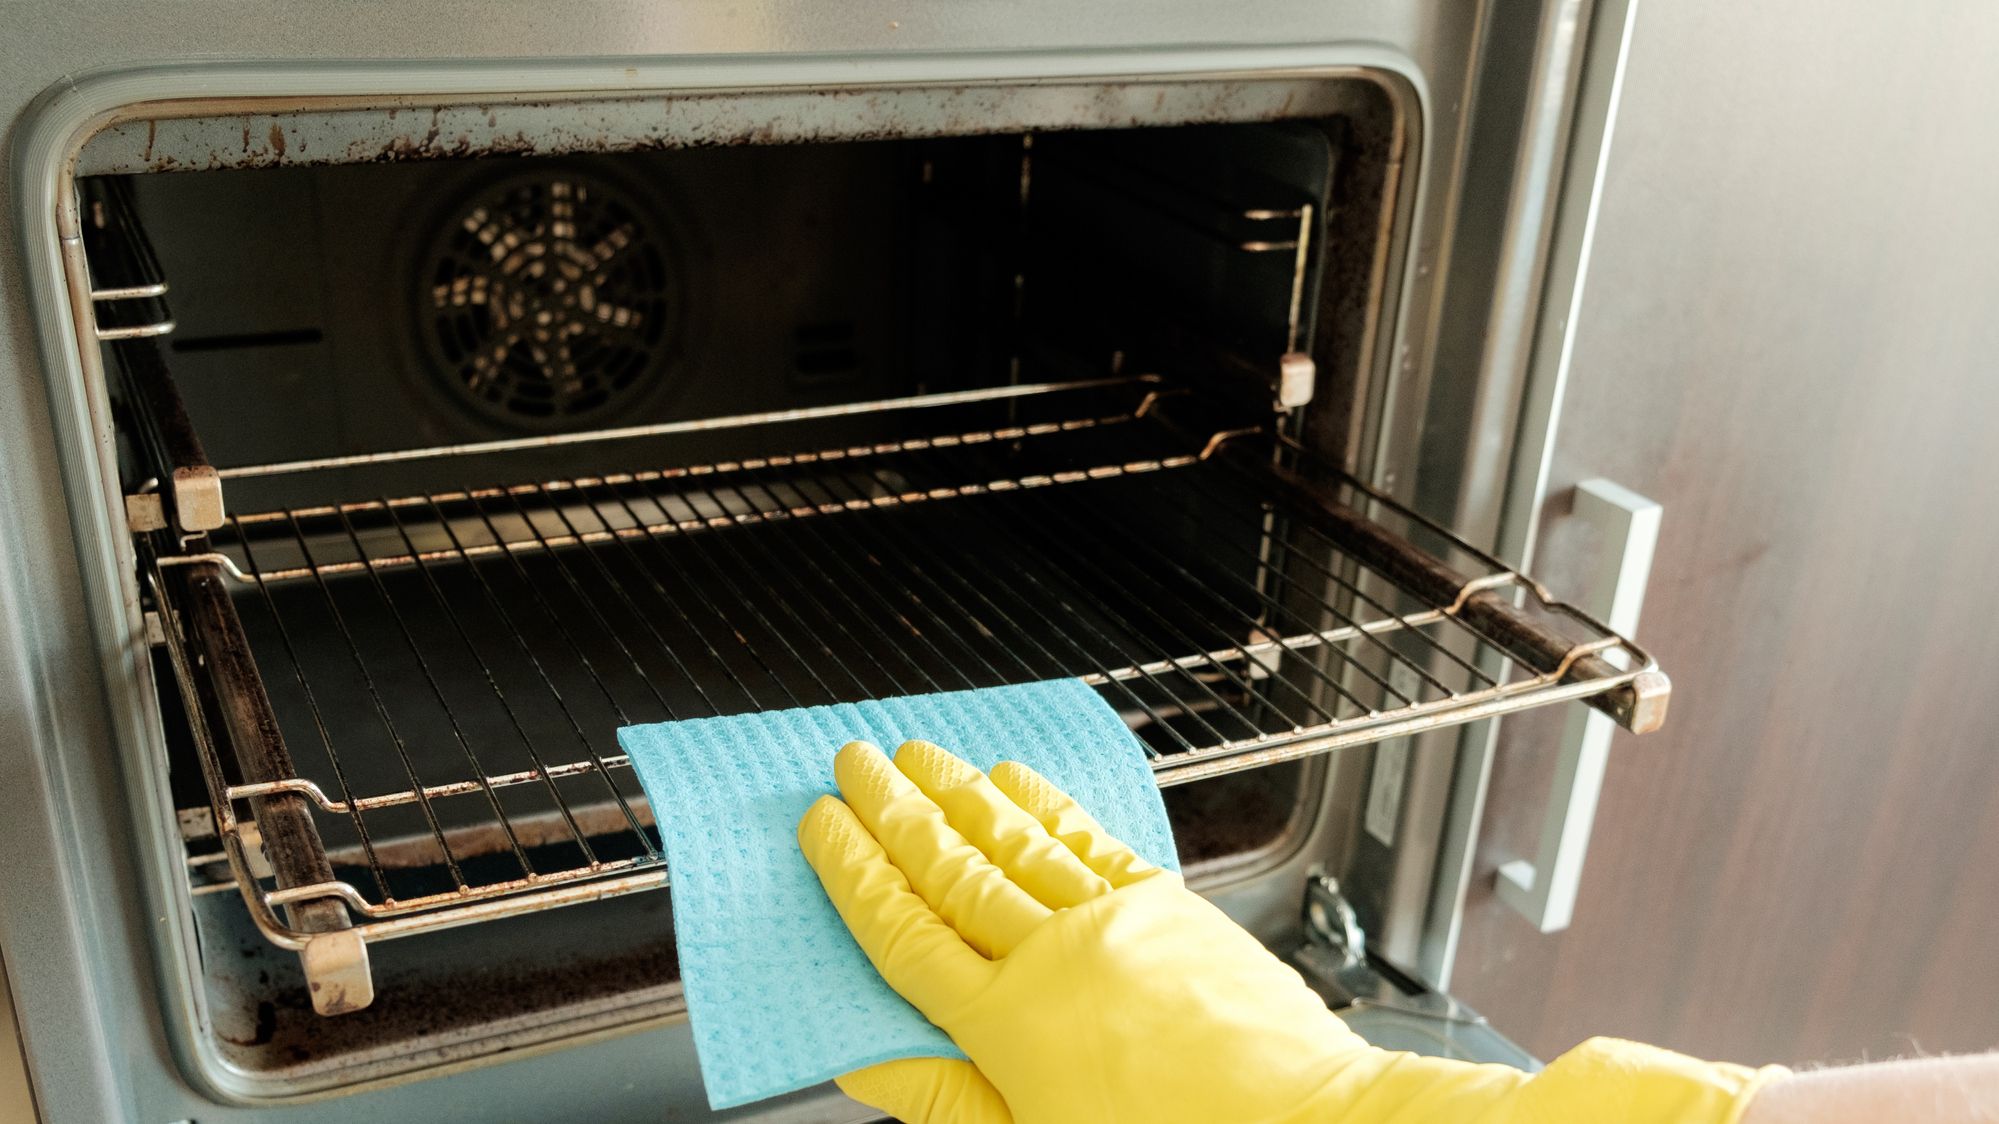 The Best Way To Clean An Oven